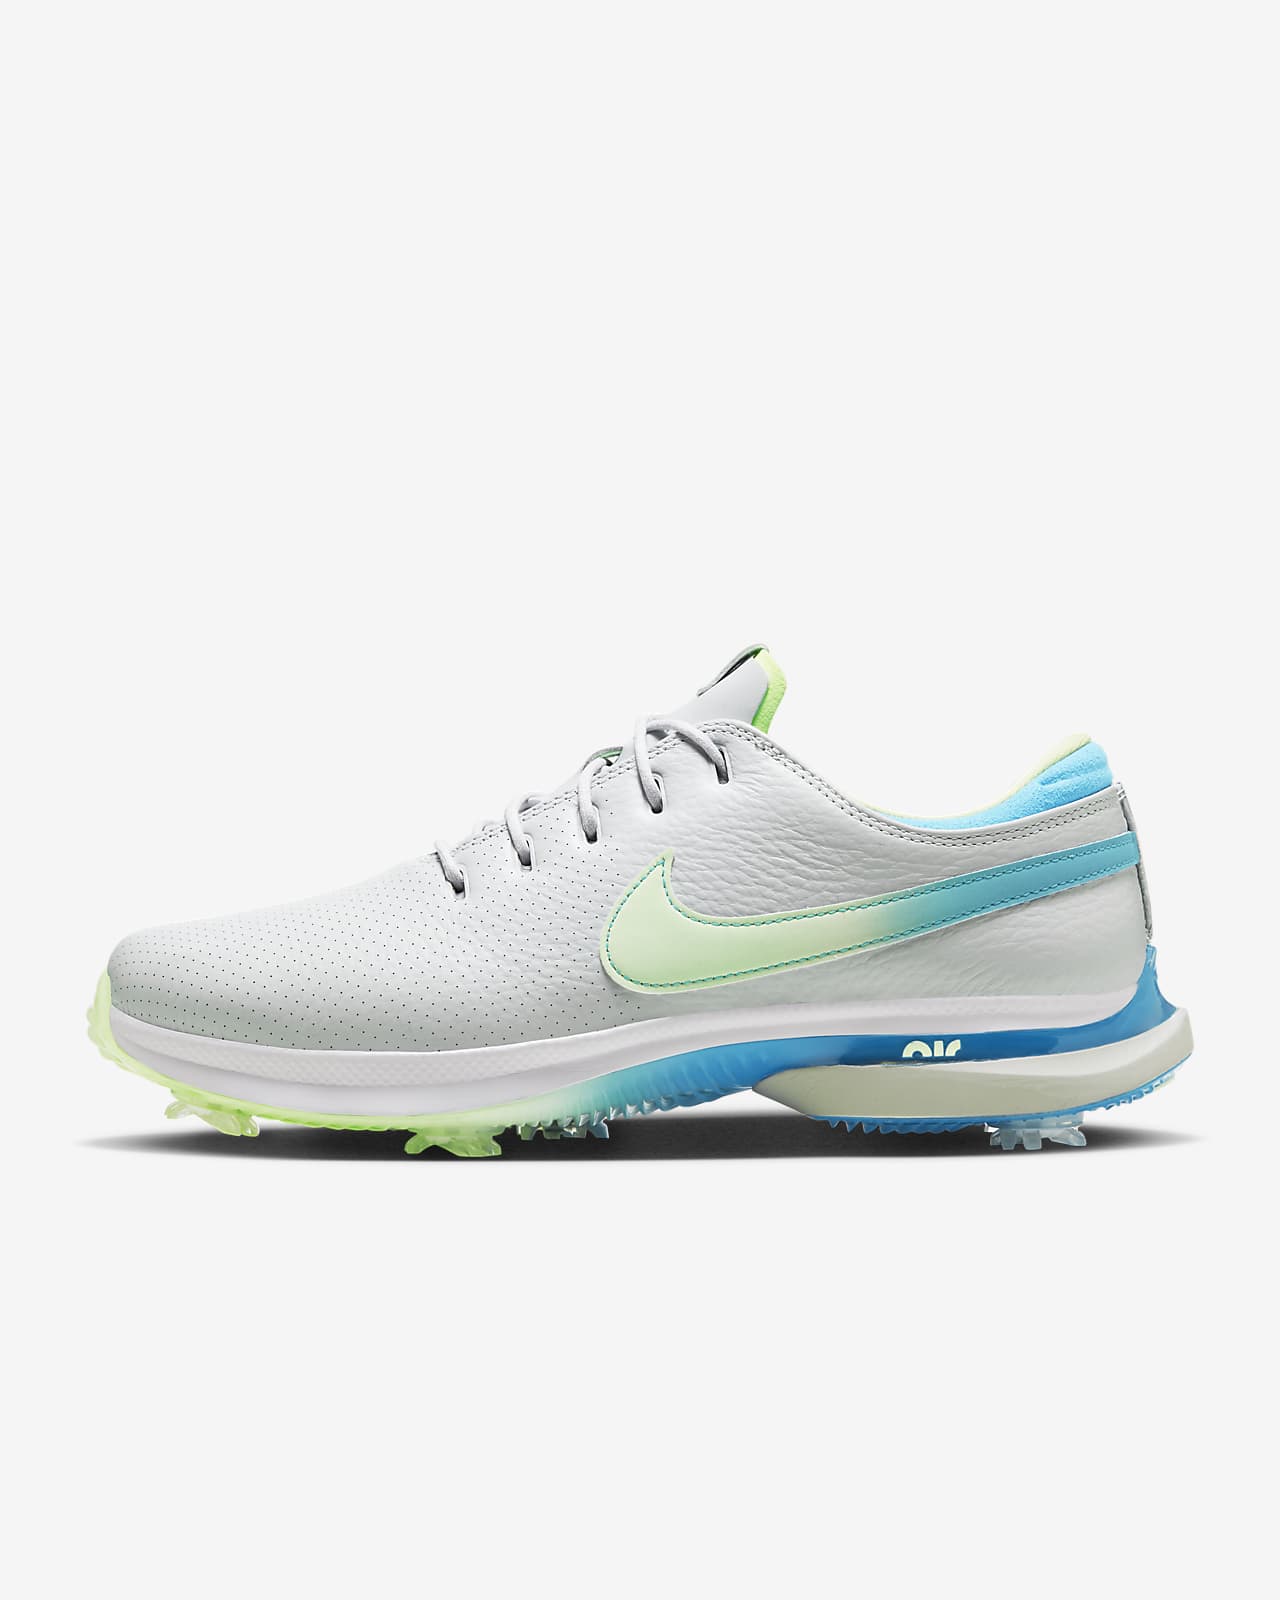 Nike Air Zoom Victory Tour 3 Golf (Wide). JP